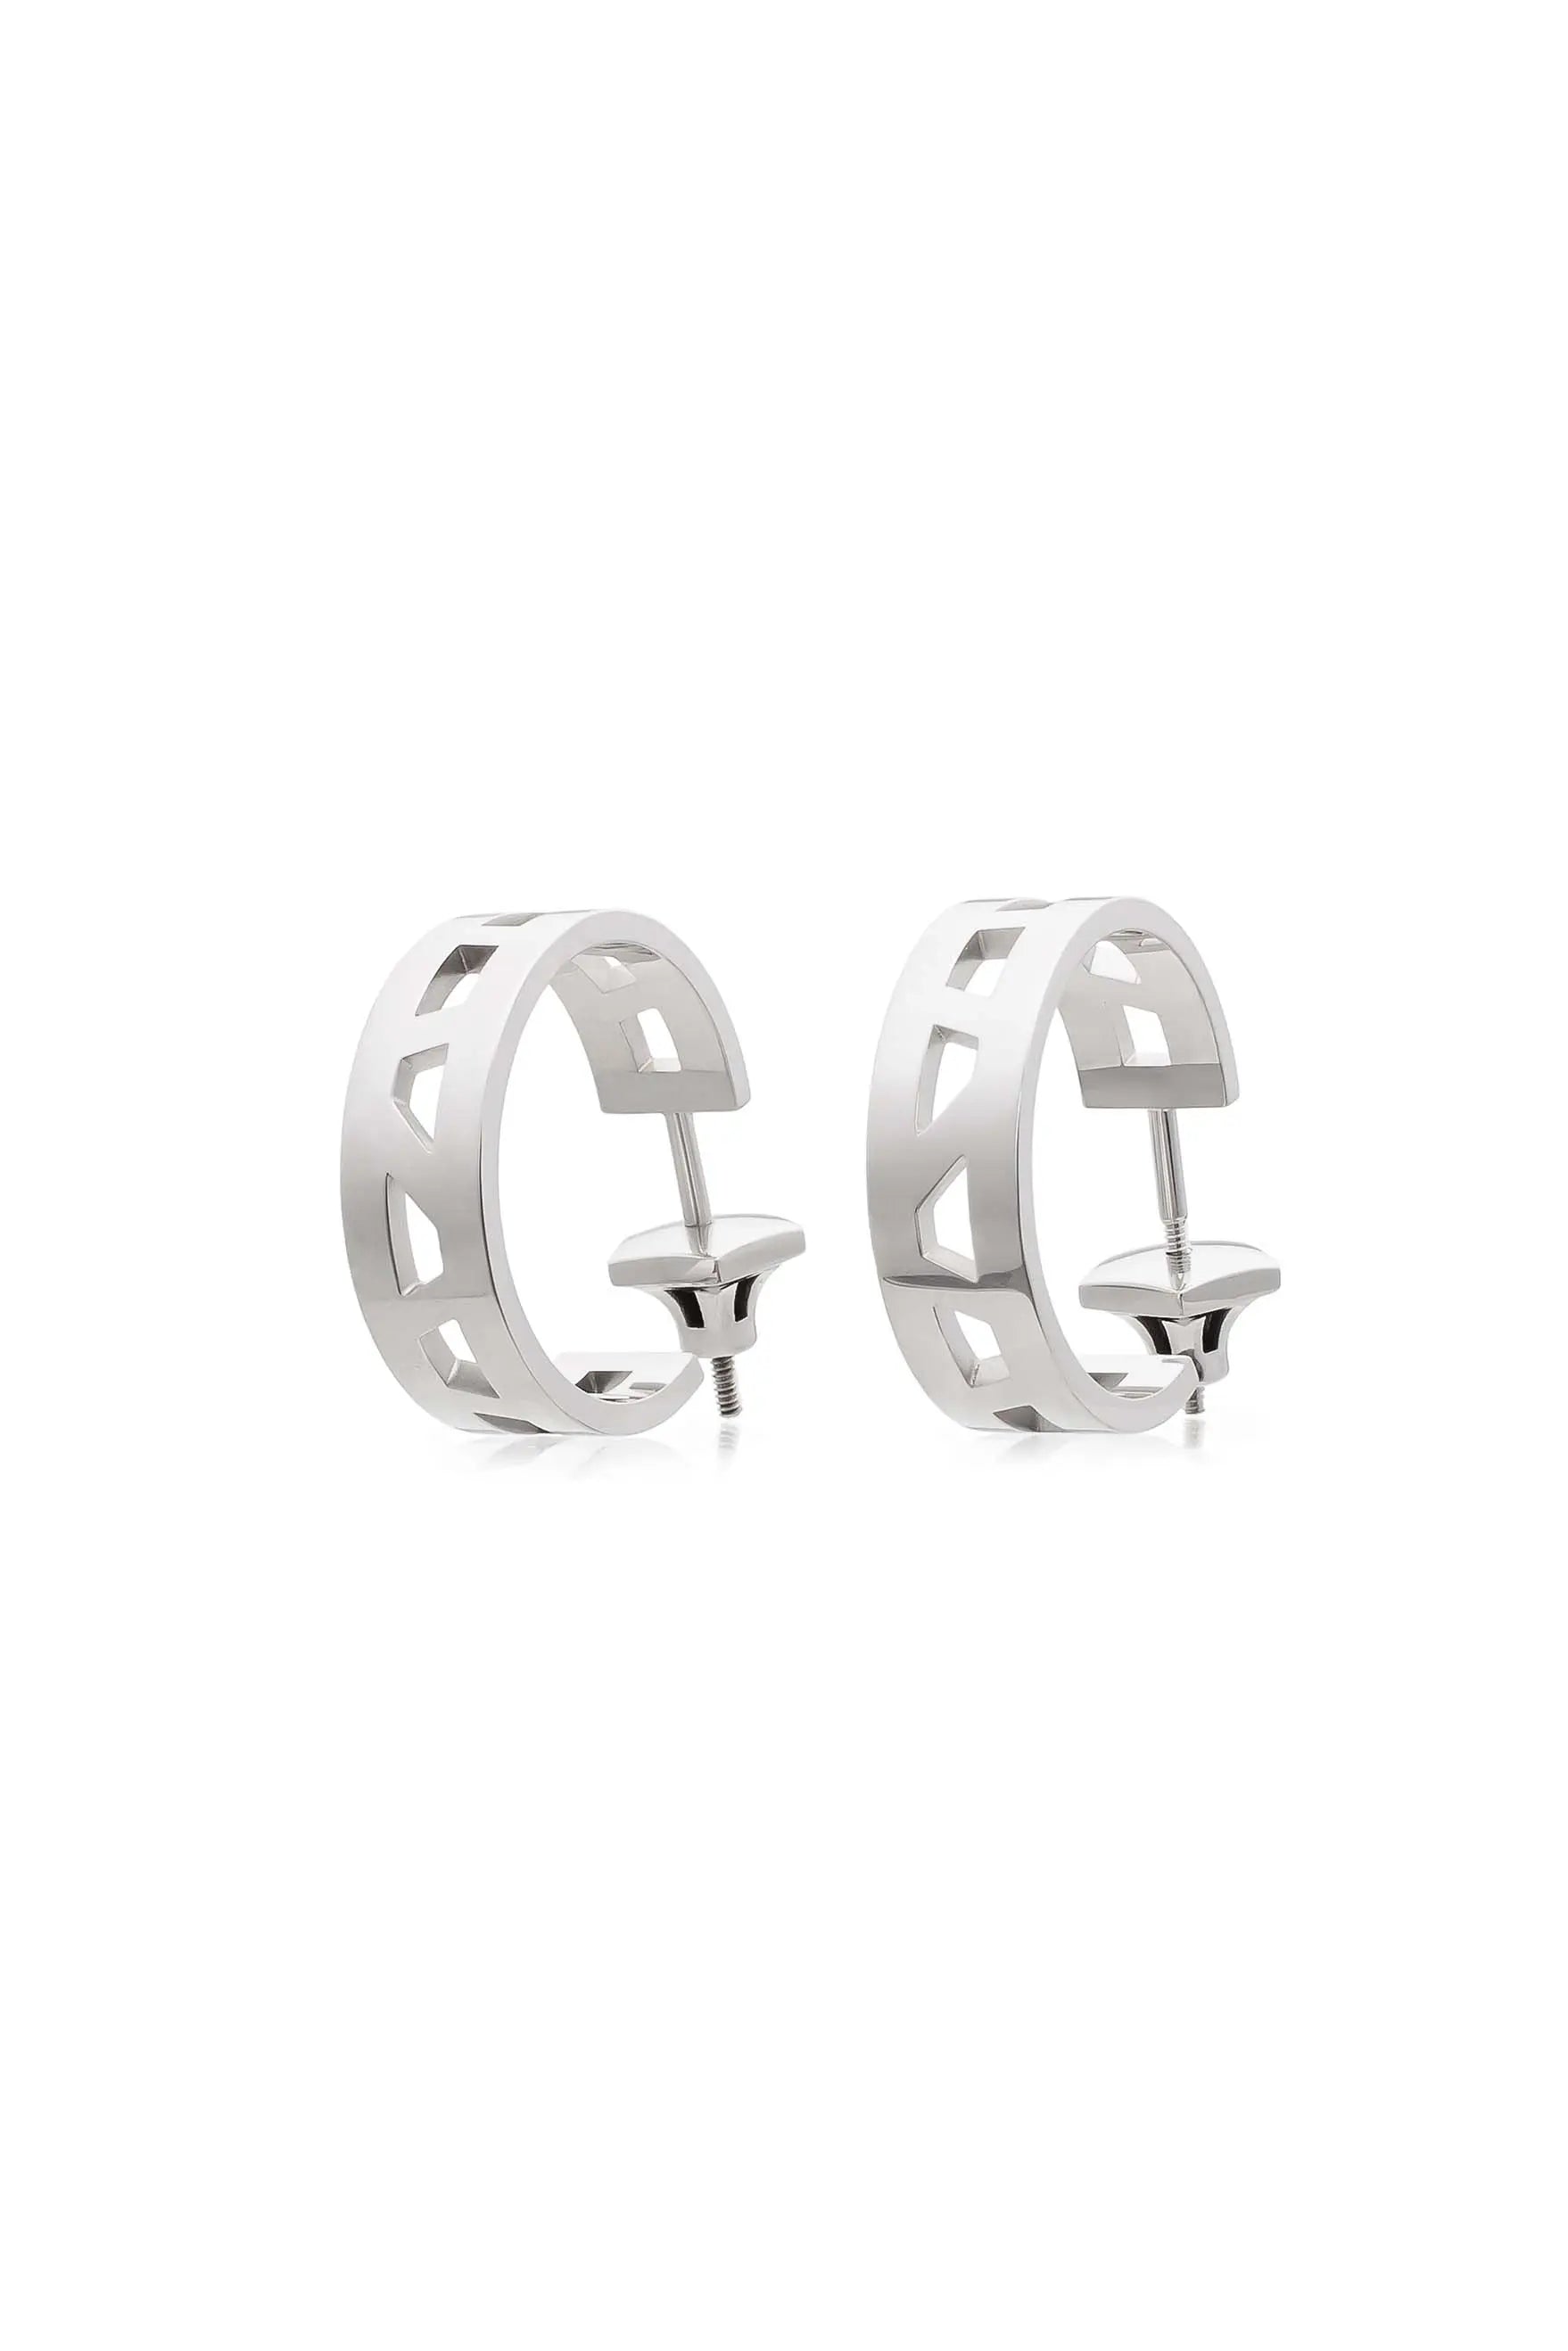 Ring-Shaped Earrings - CDD Jewelry